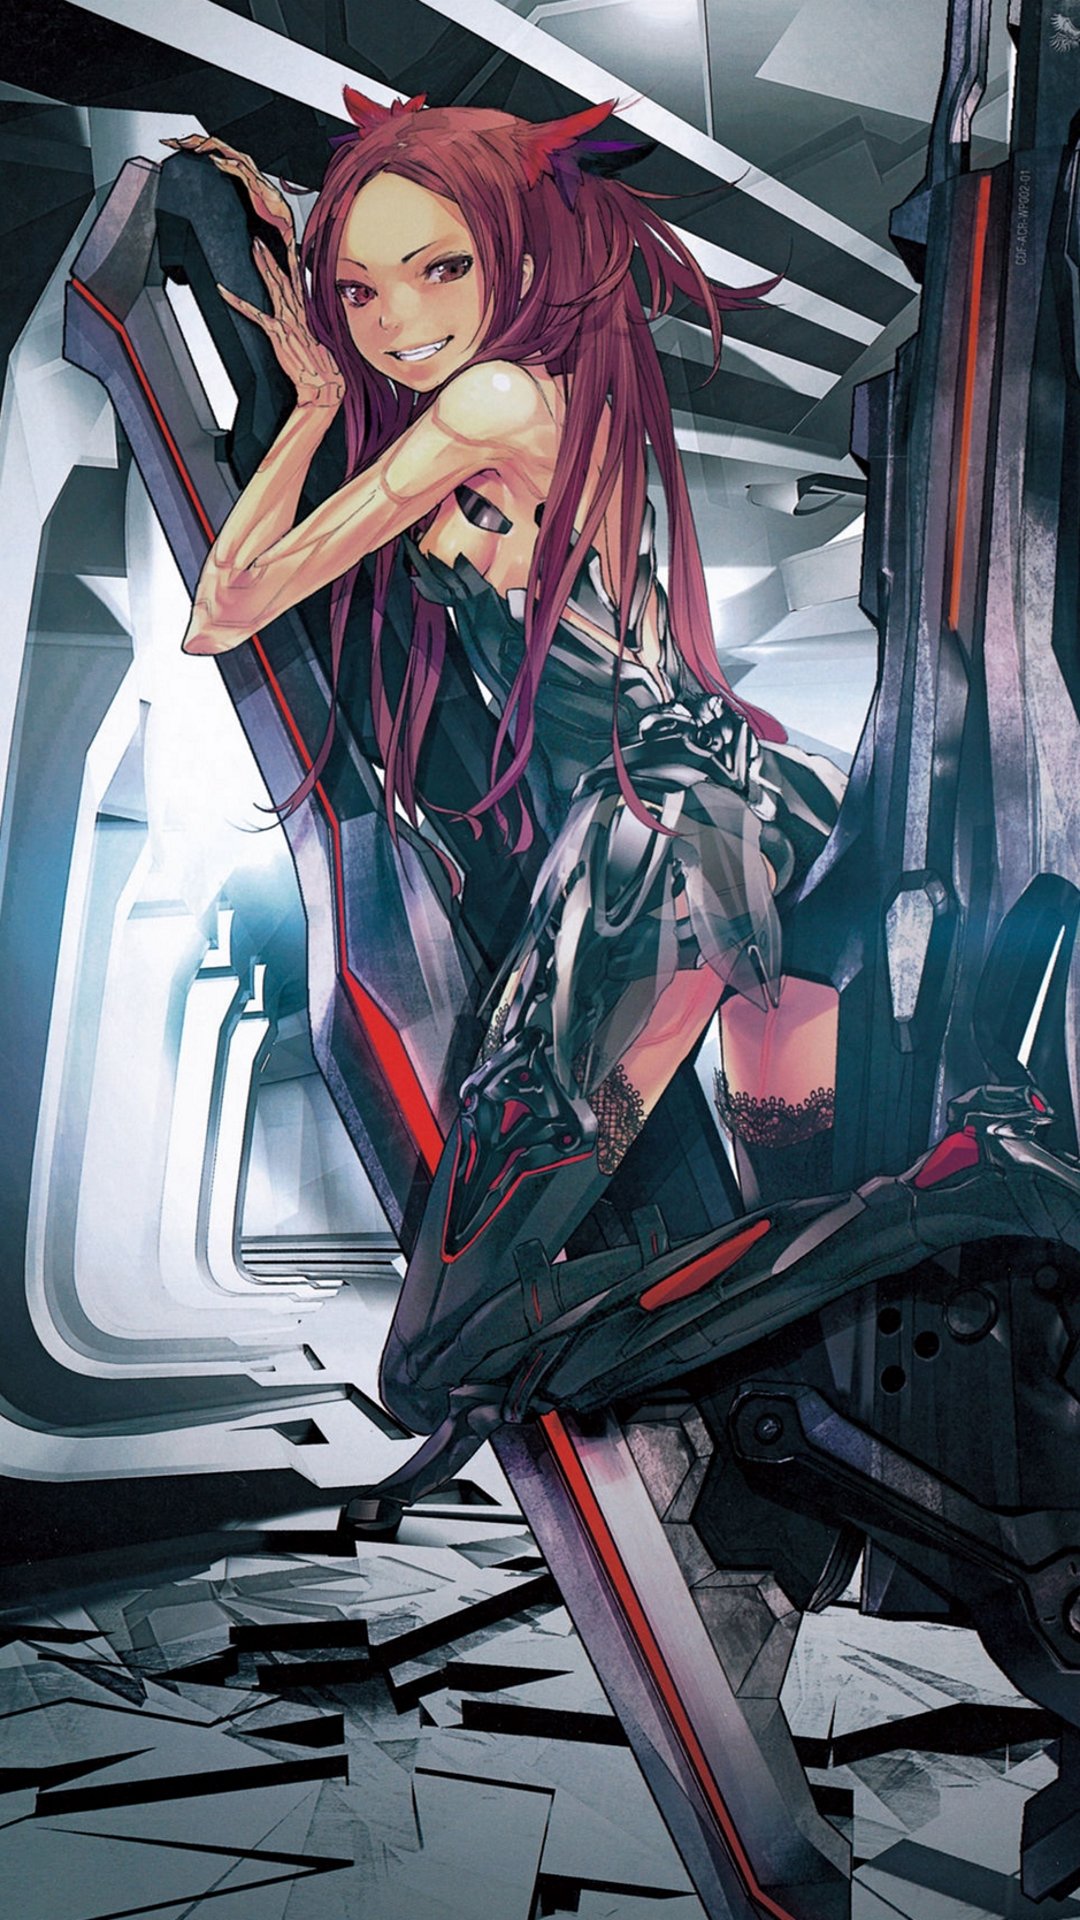 First Impressions: Beatless | The Tiny World of an Anime Amateur